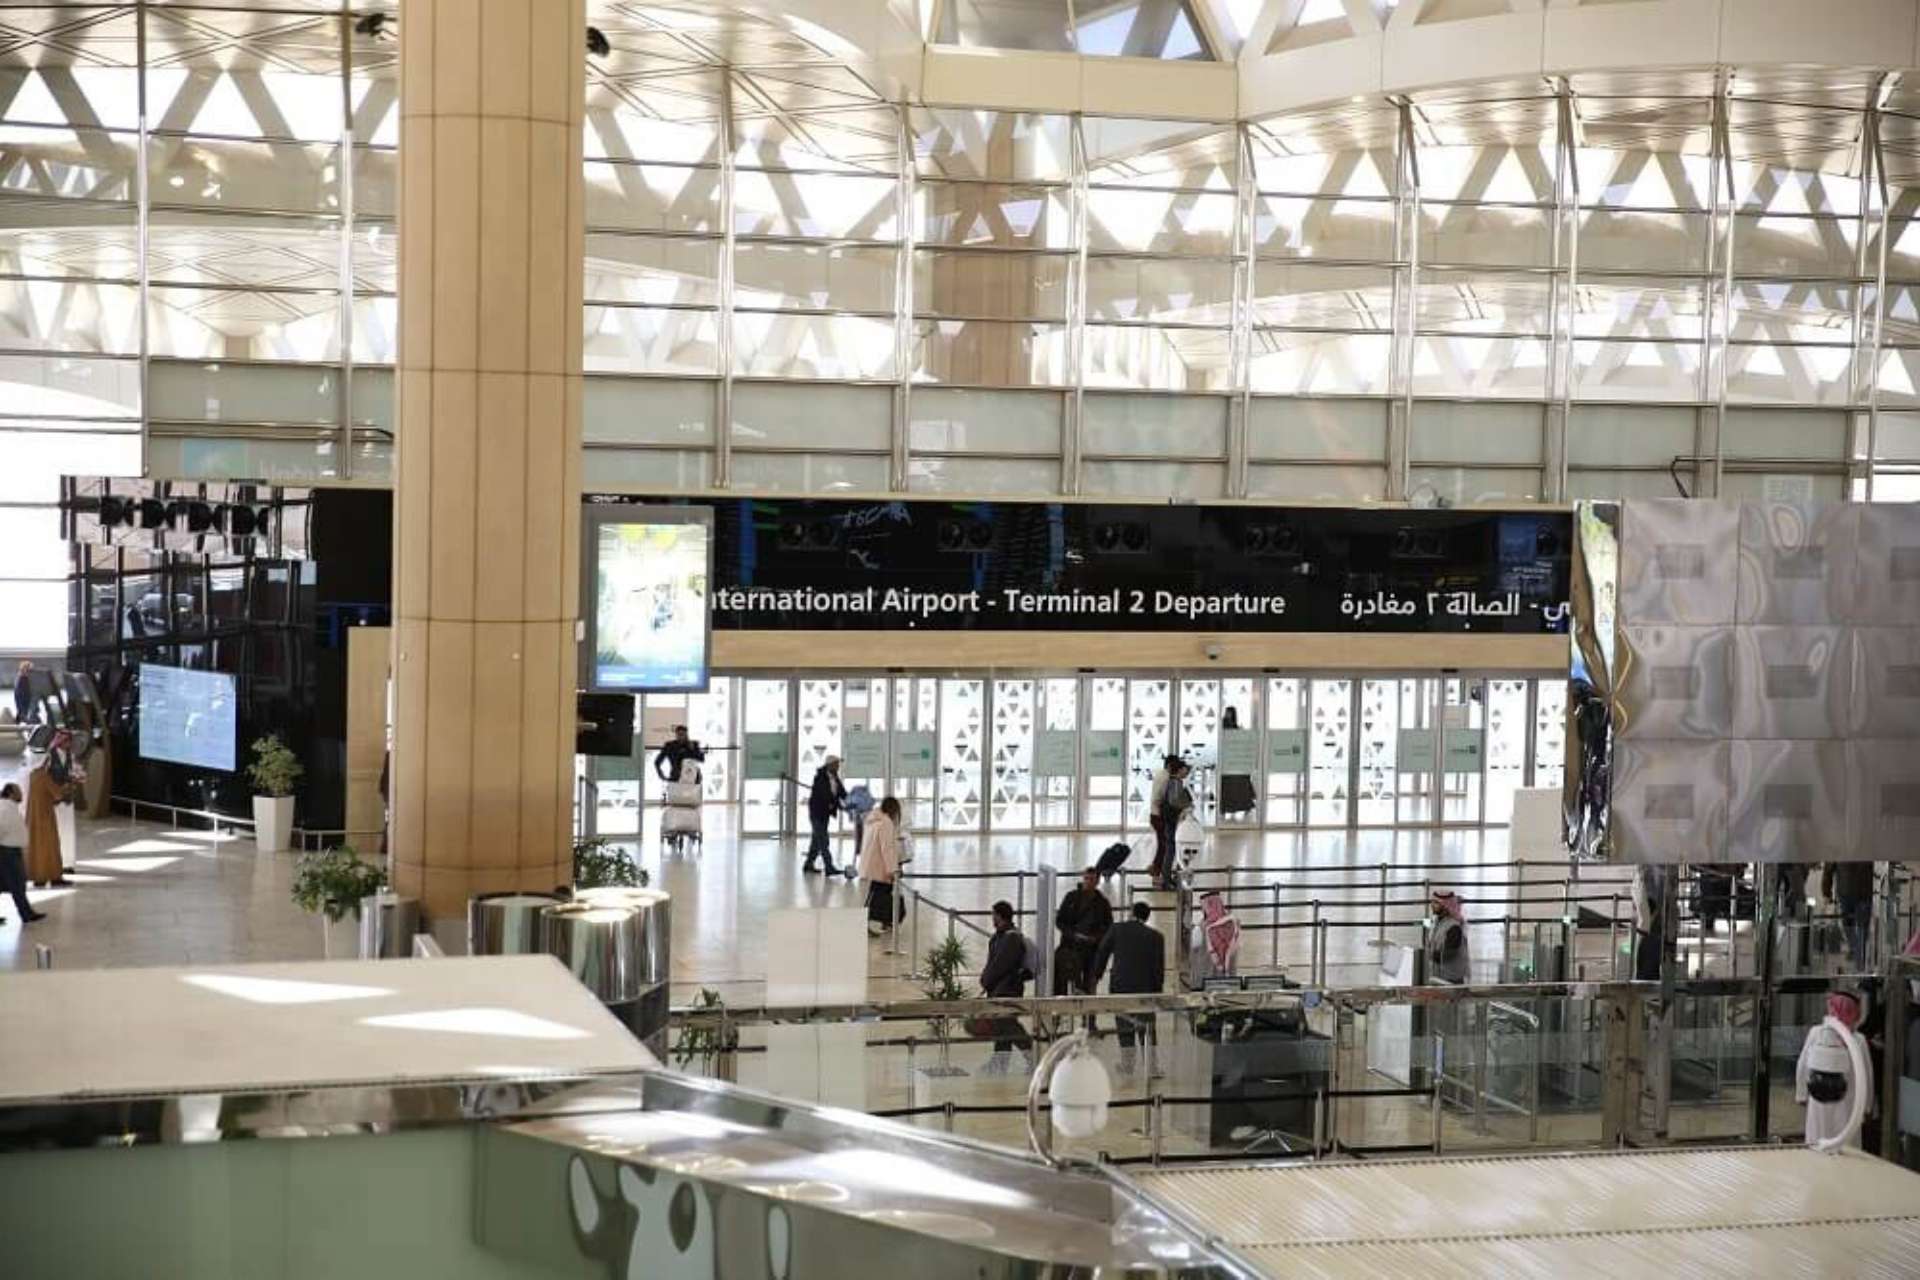 Exceptional Assistance at King Khalid International Airport